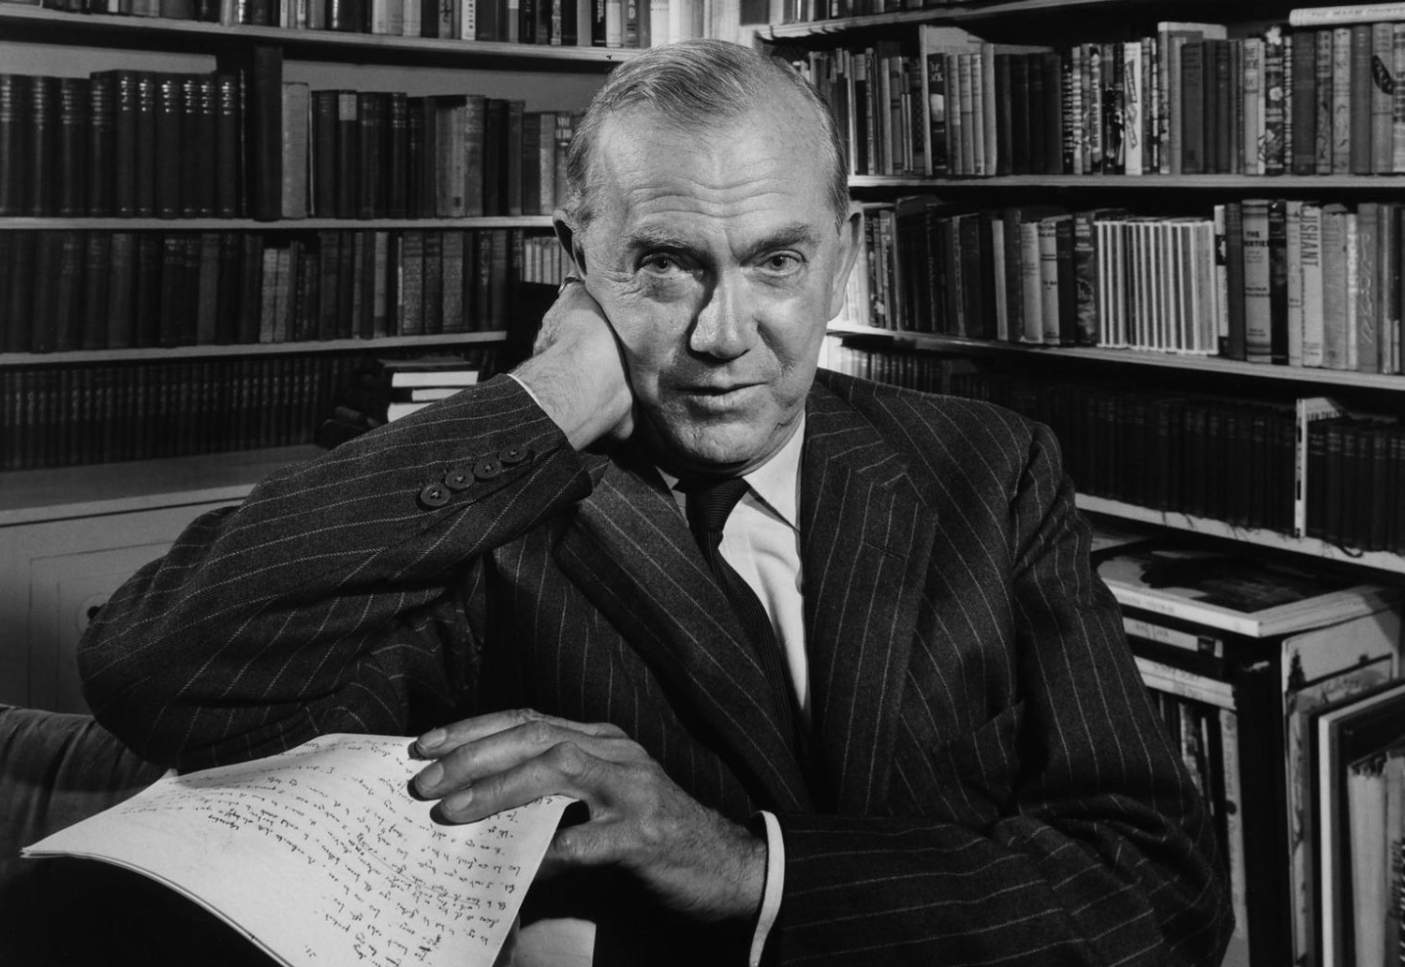 Graham Greene On Kim Philby, John le Carre and The Spying Game